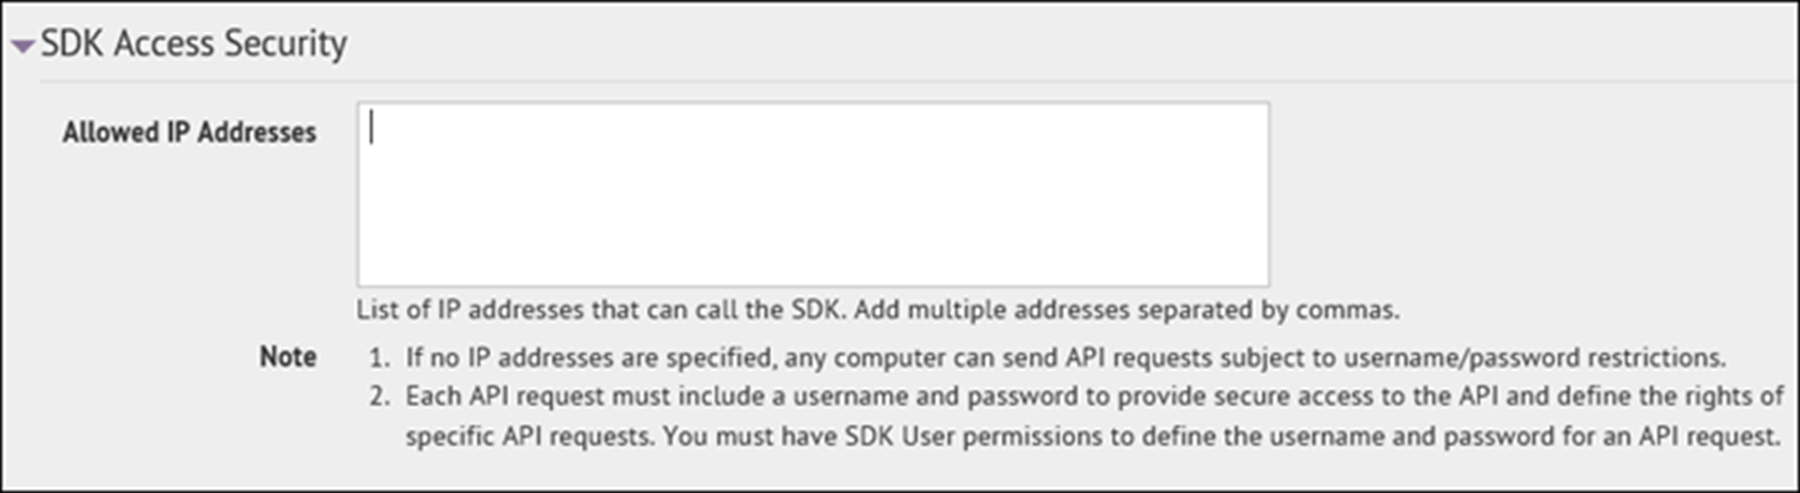 The SDK Access Security section